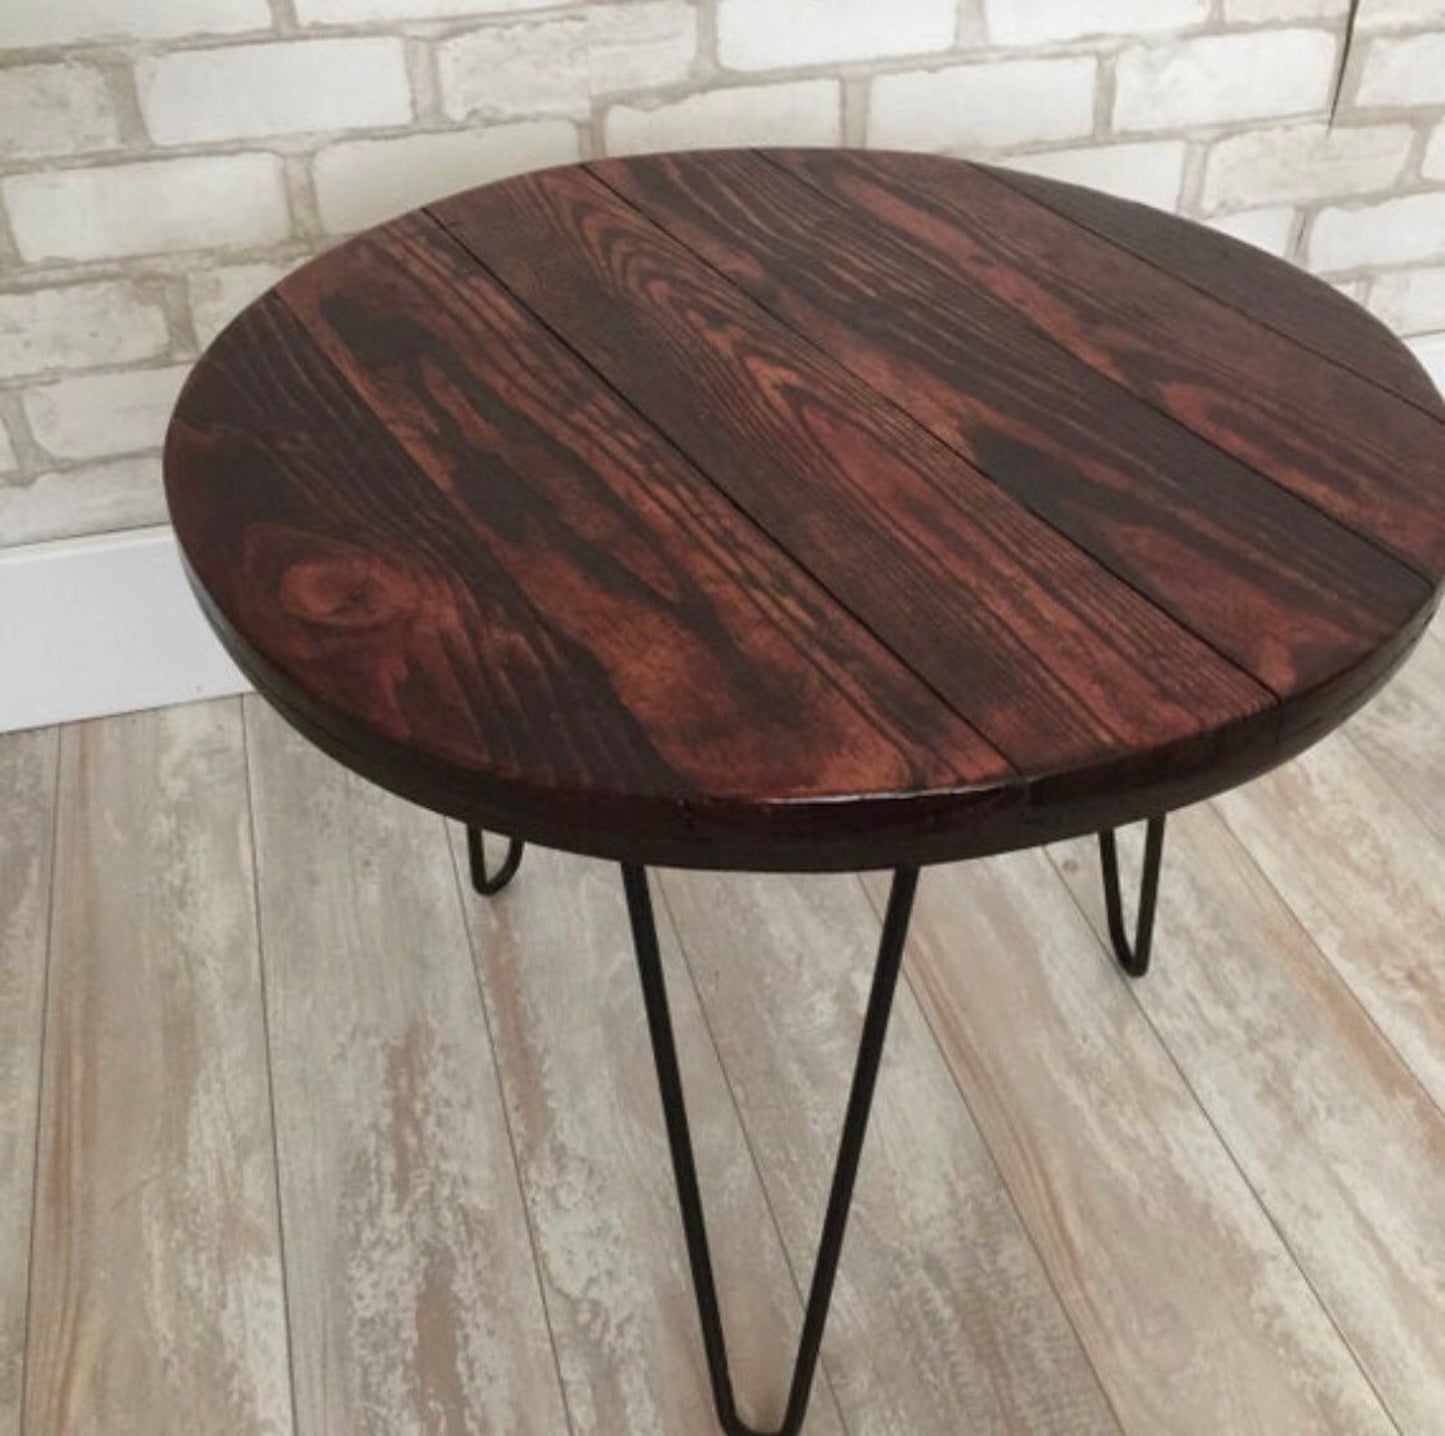 Customizable Round Coffee Table - Circular Living Room Table Craft Furniture in Your Choice of Size, Stain, and Style Handcrafted in the USA by OBPCO